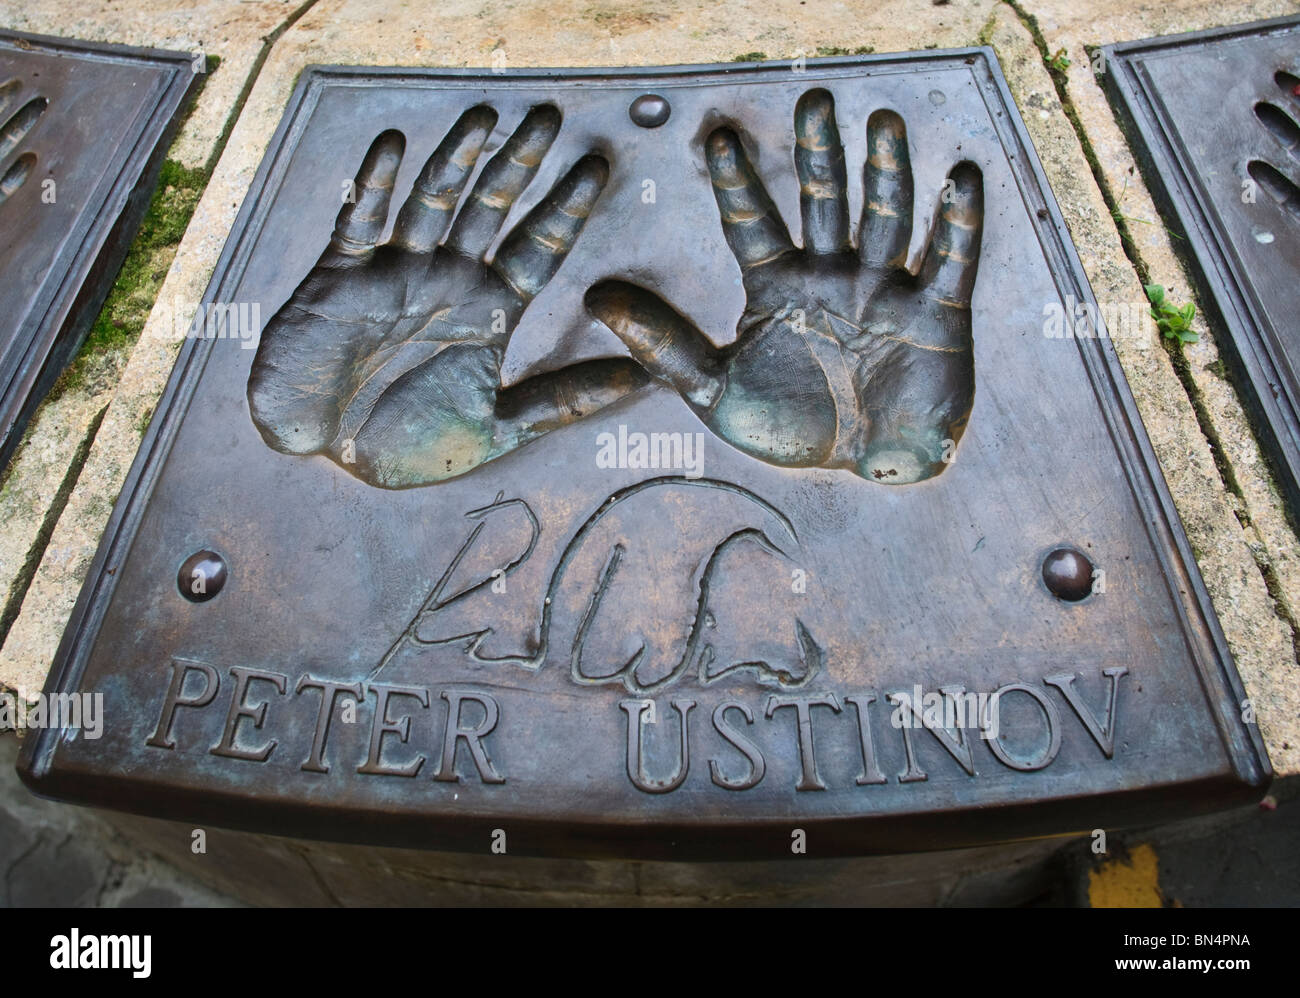 Hand prints and signature of the British actor Peter Ustinov, New Theatre Royal, Bath Stock Photo